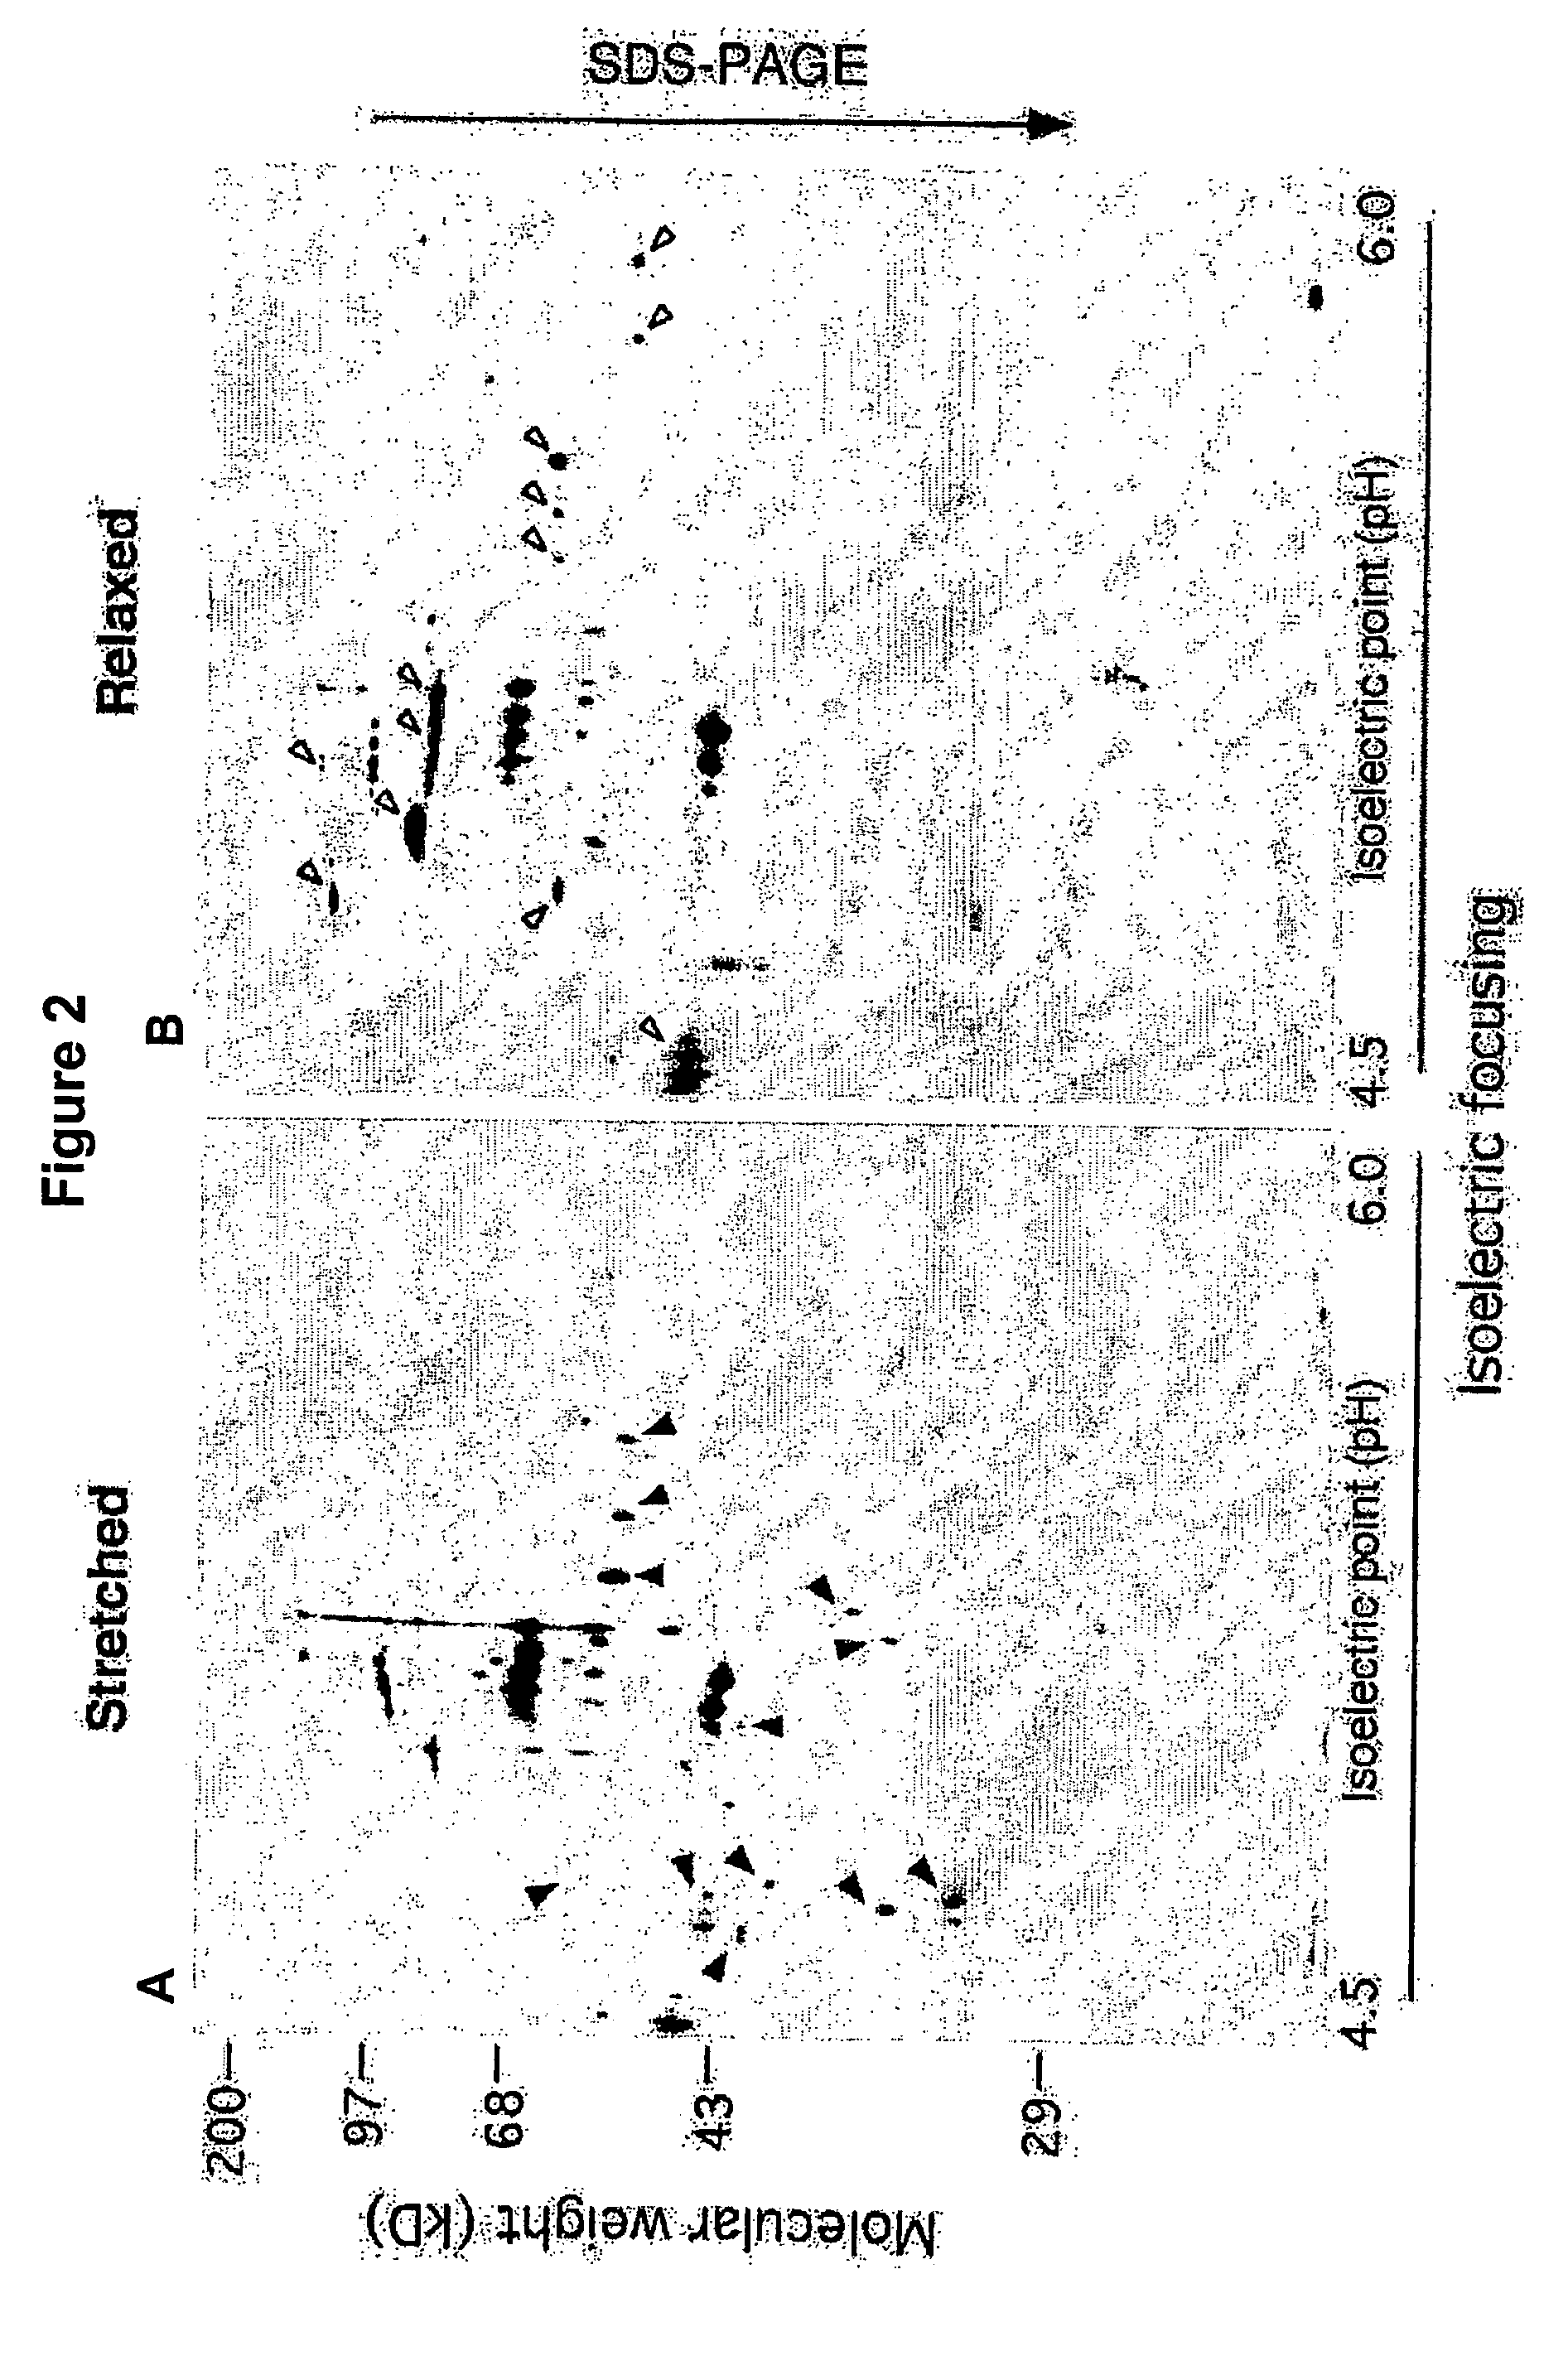 System and method for identifying proteins involved in force-initiated signal transduction